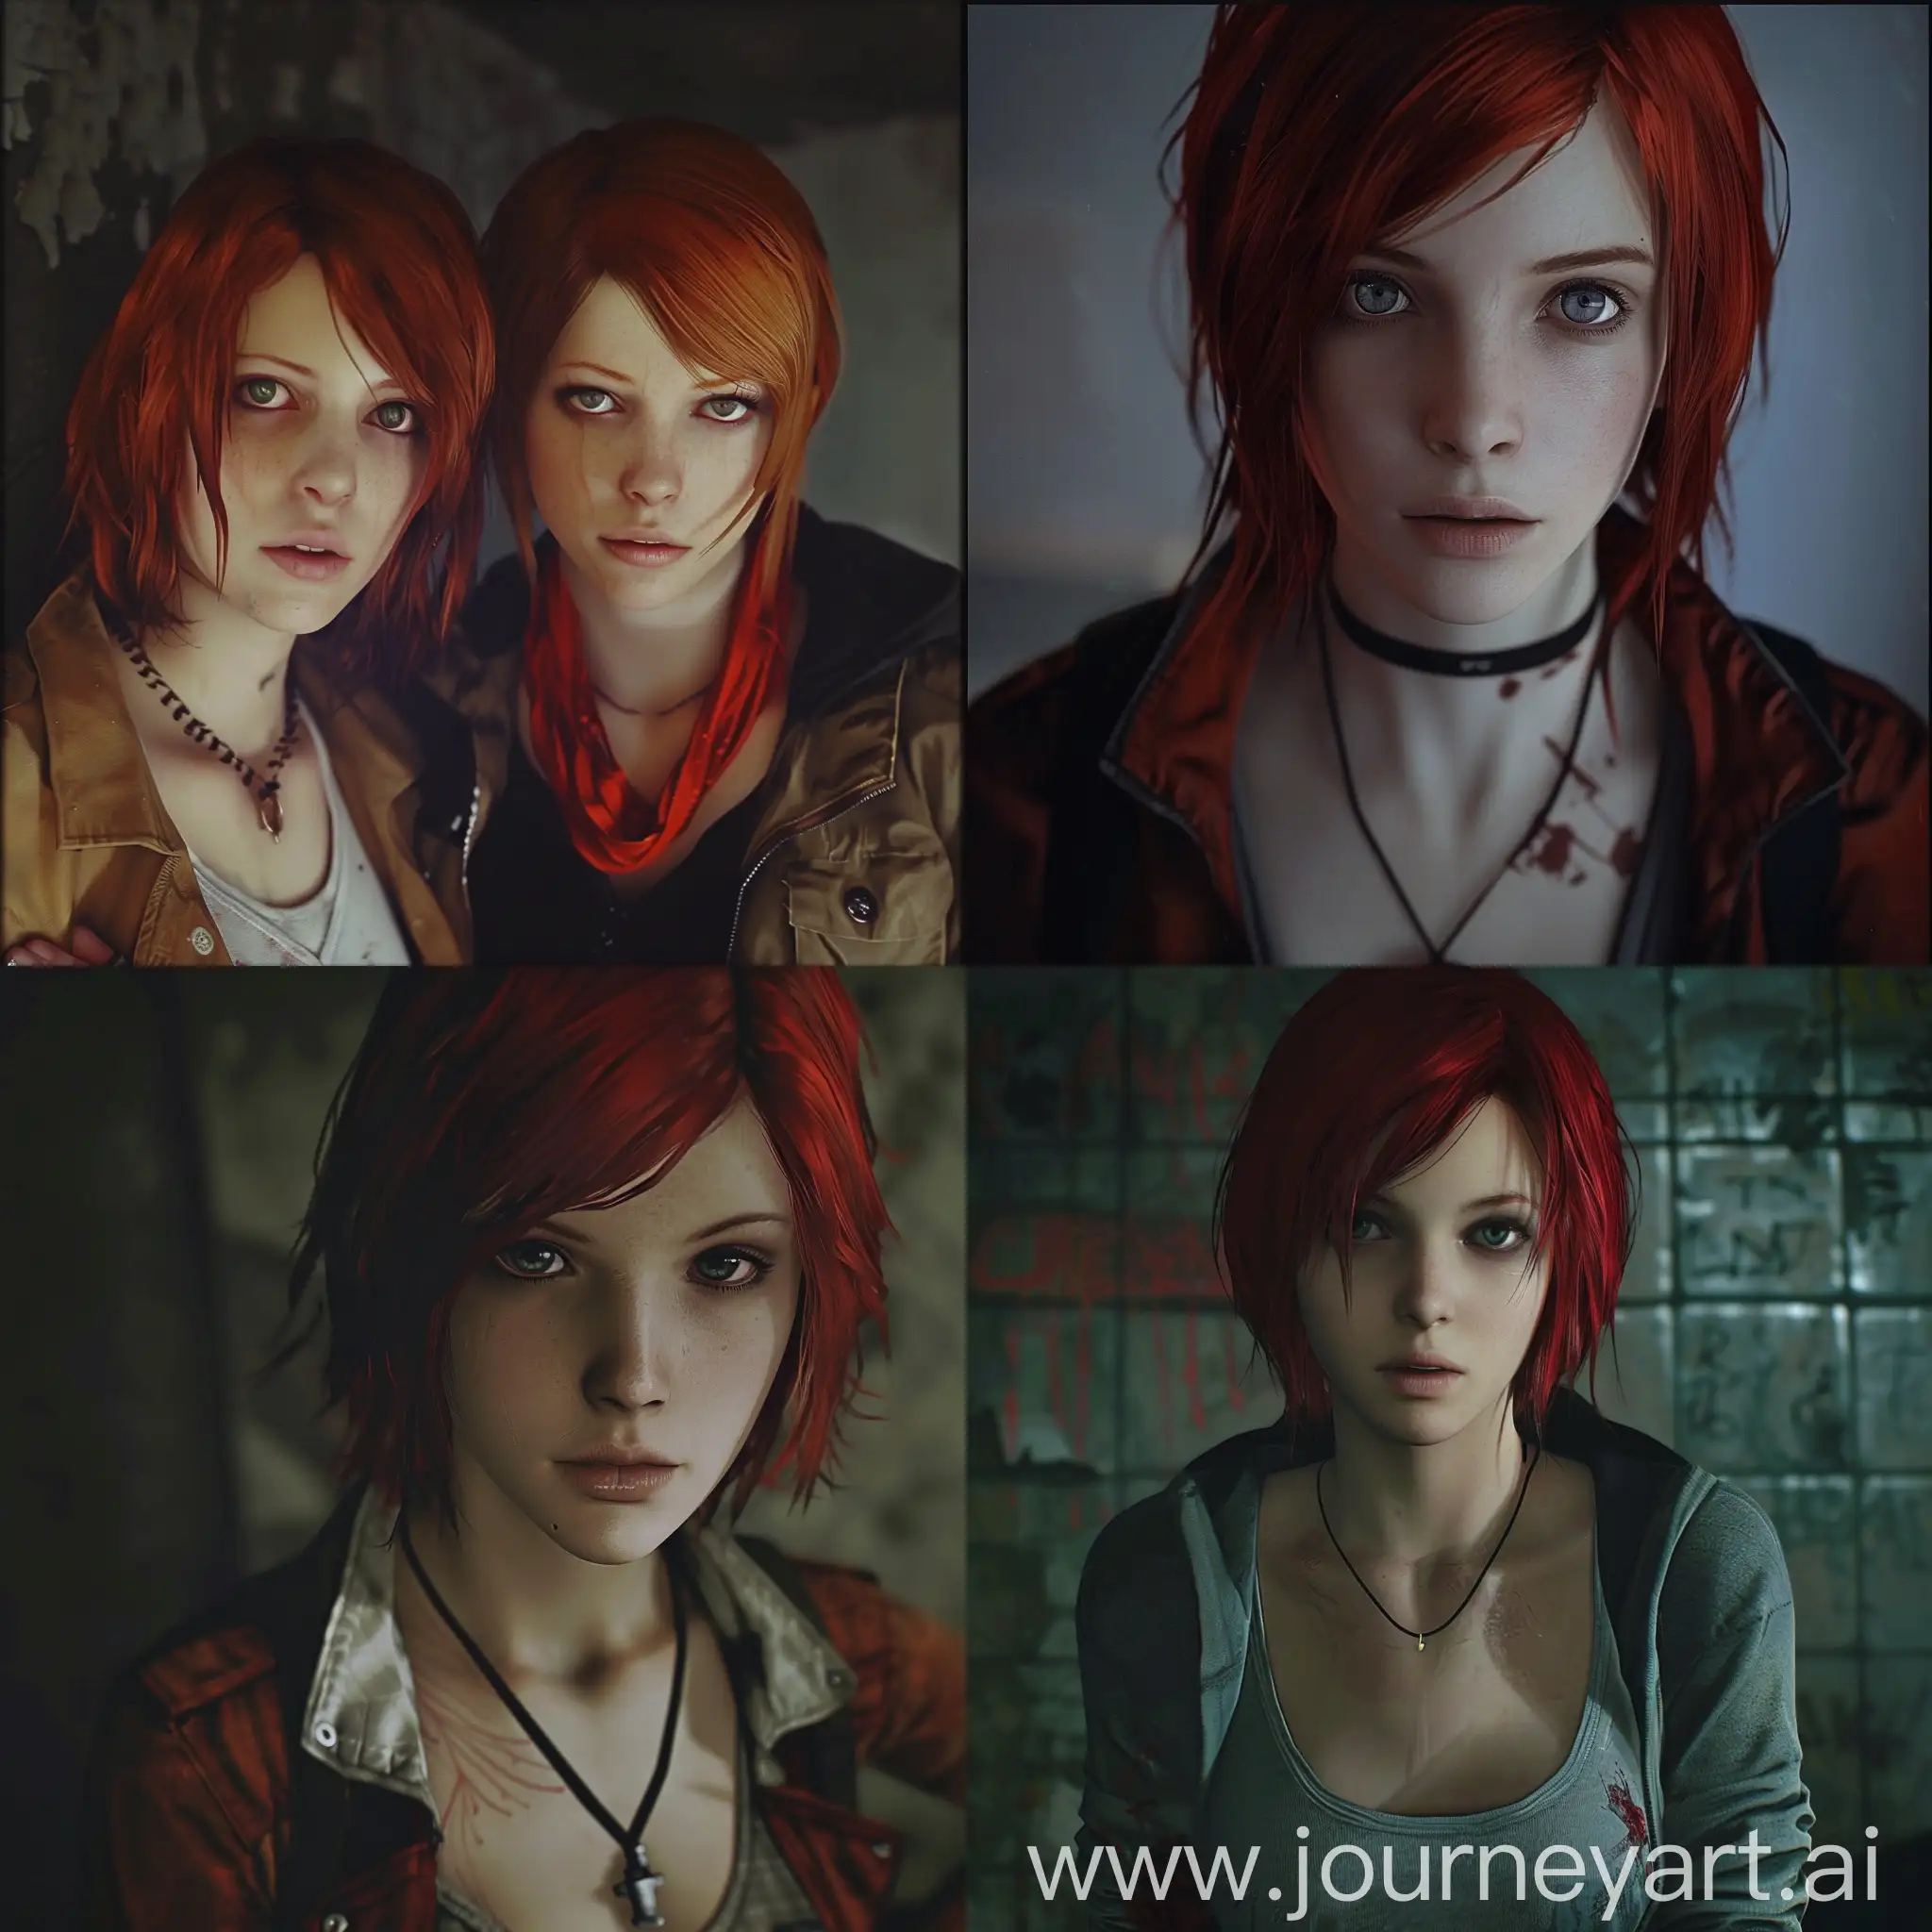 Gothic-RedHaired-Heroines-in-Mysterious-Video-Game-Setting